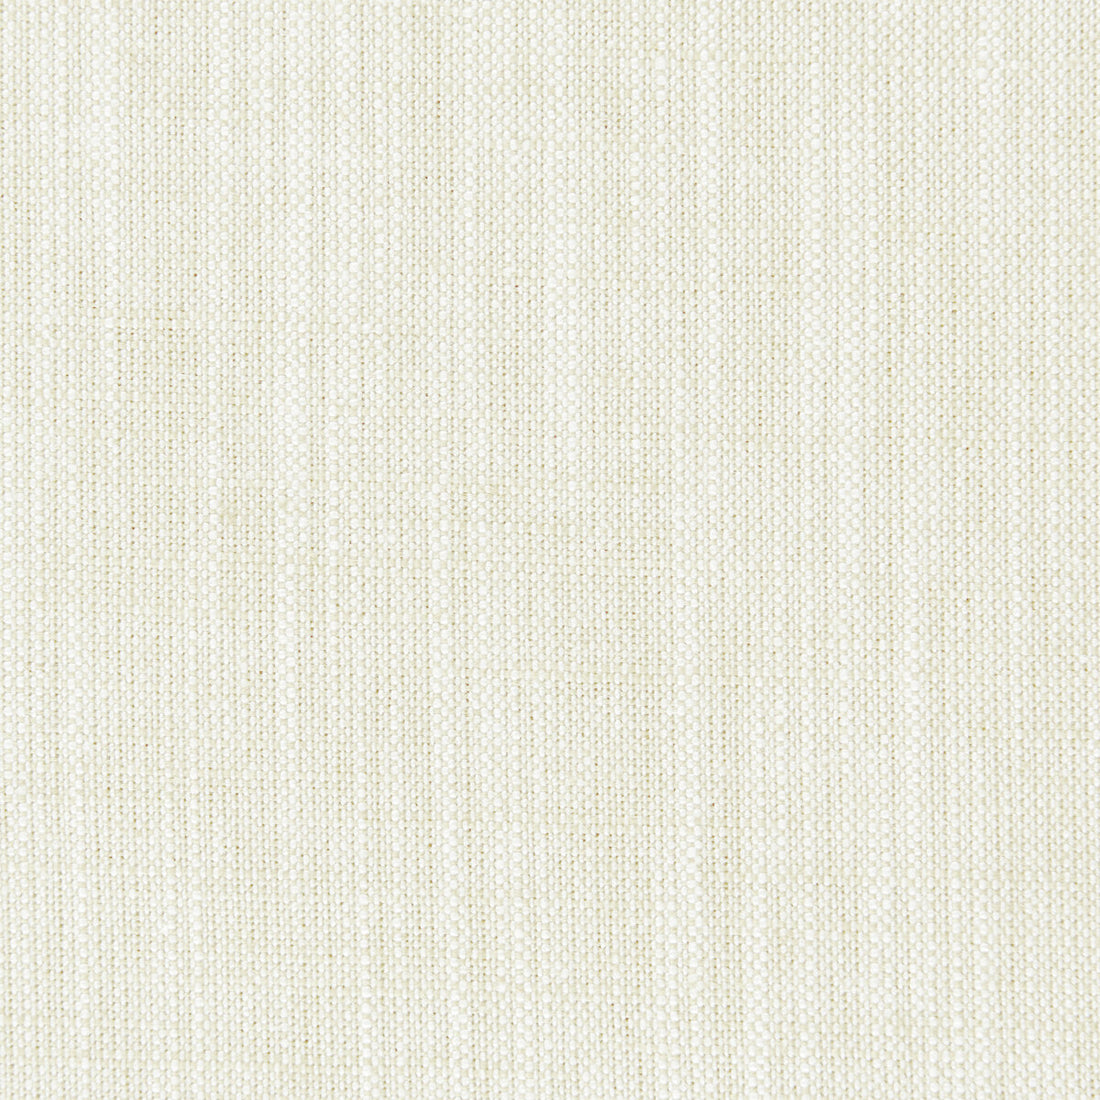 Biarritz fabric in ivory color - pattern F0965/23.CAC.0 - by Clarke And Clarke in the Clarke &amp; Clarke Biarritz collection